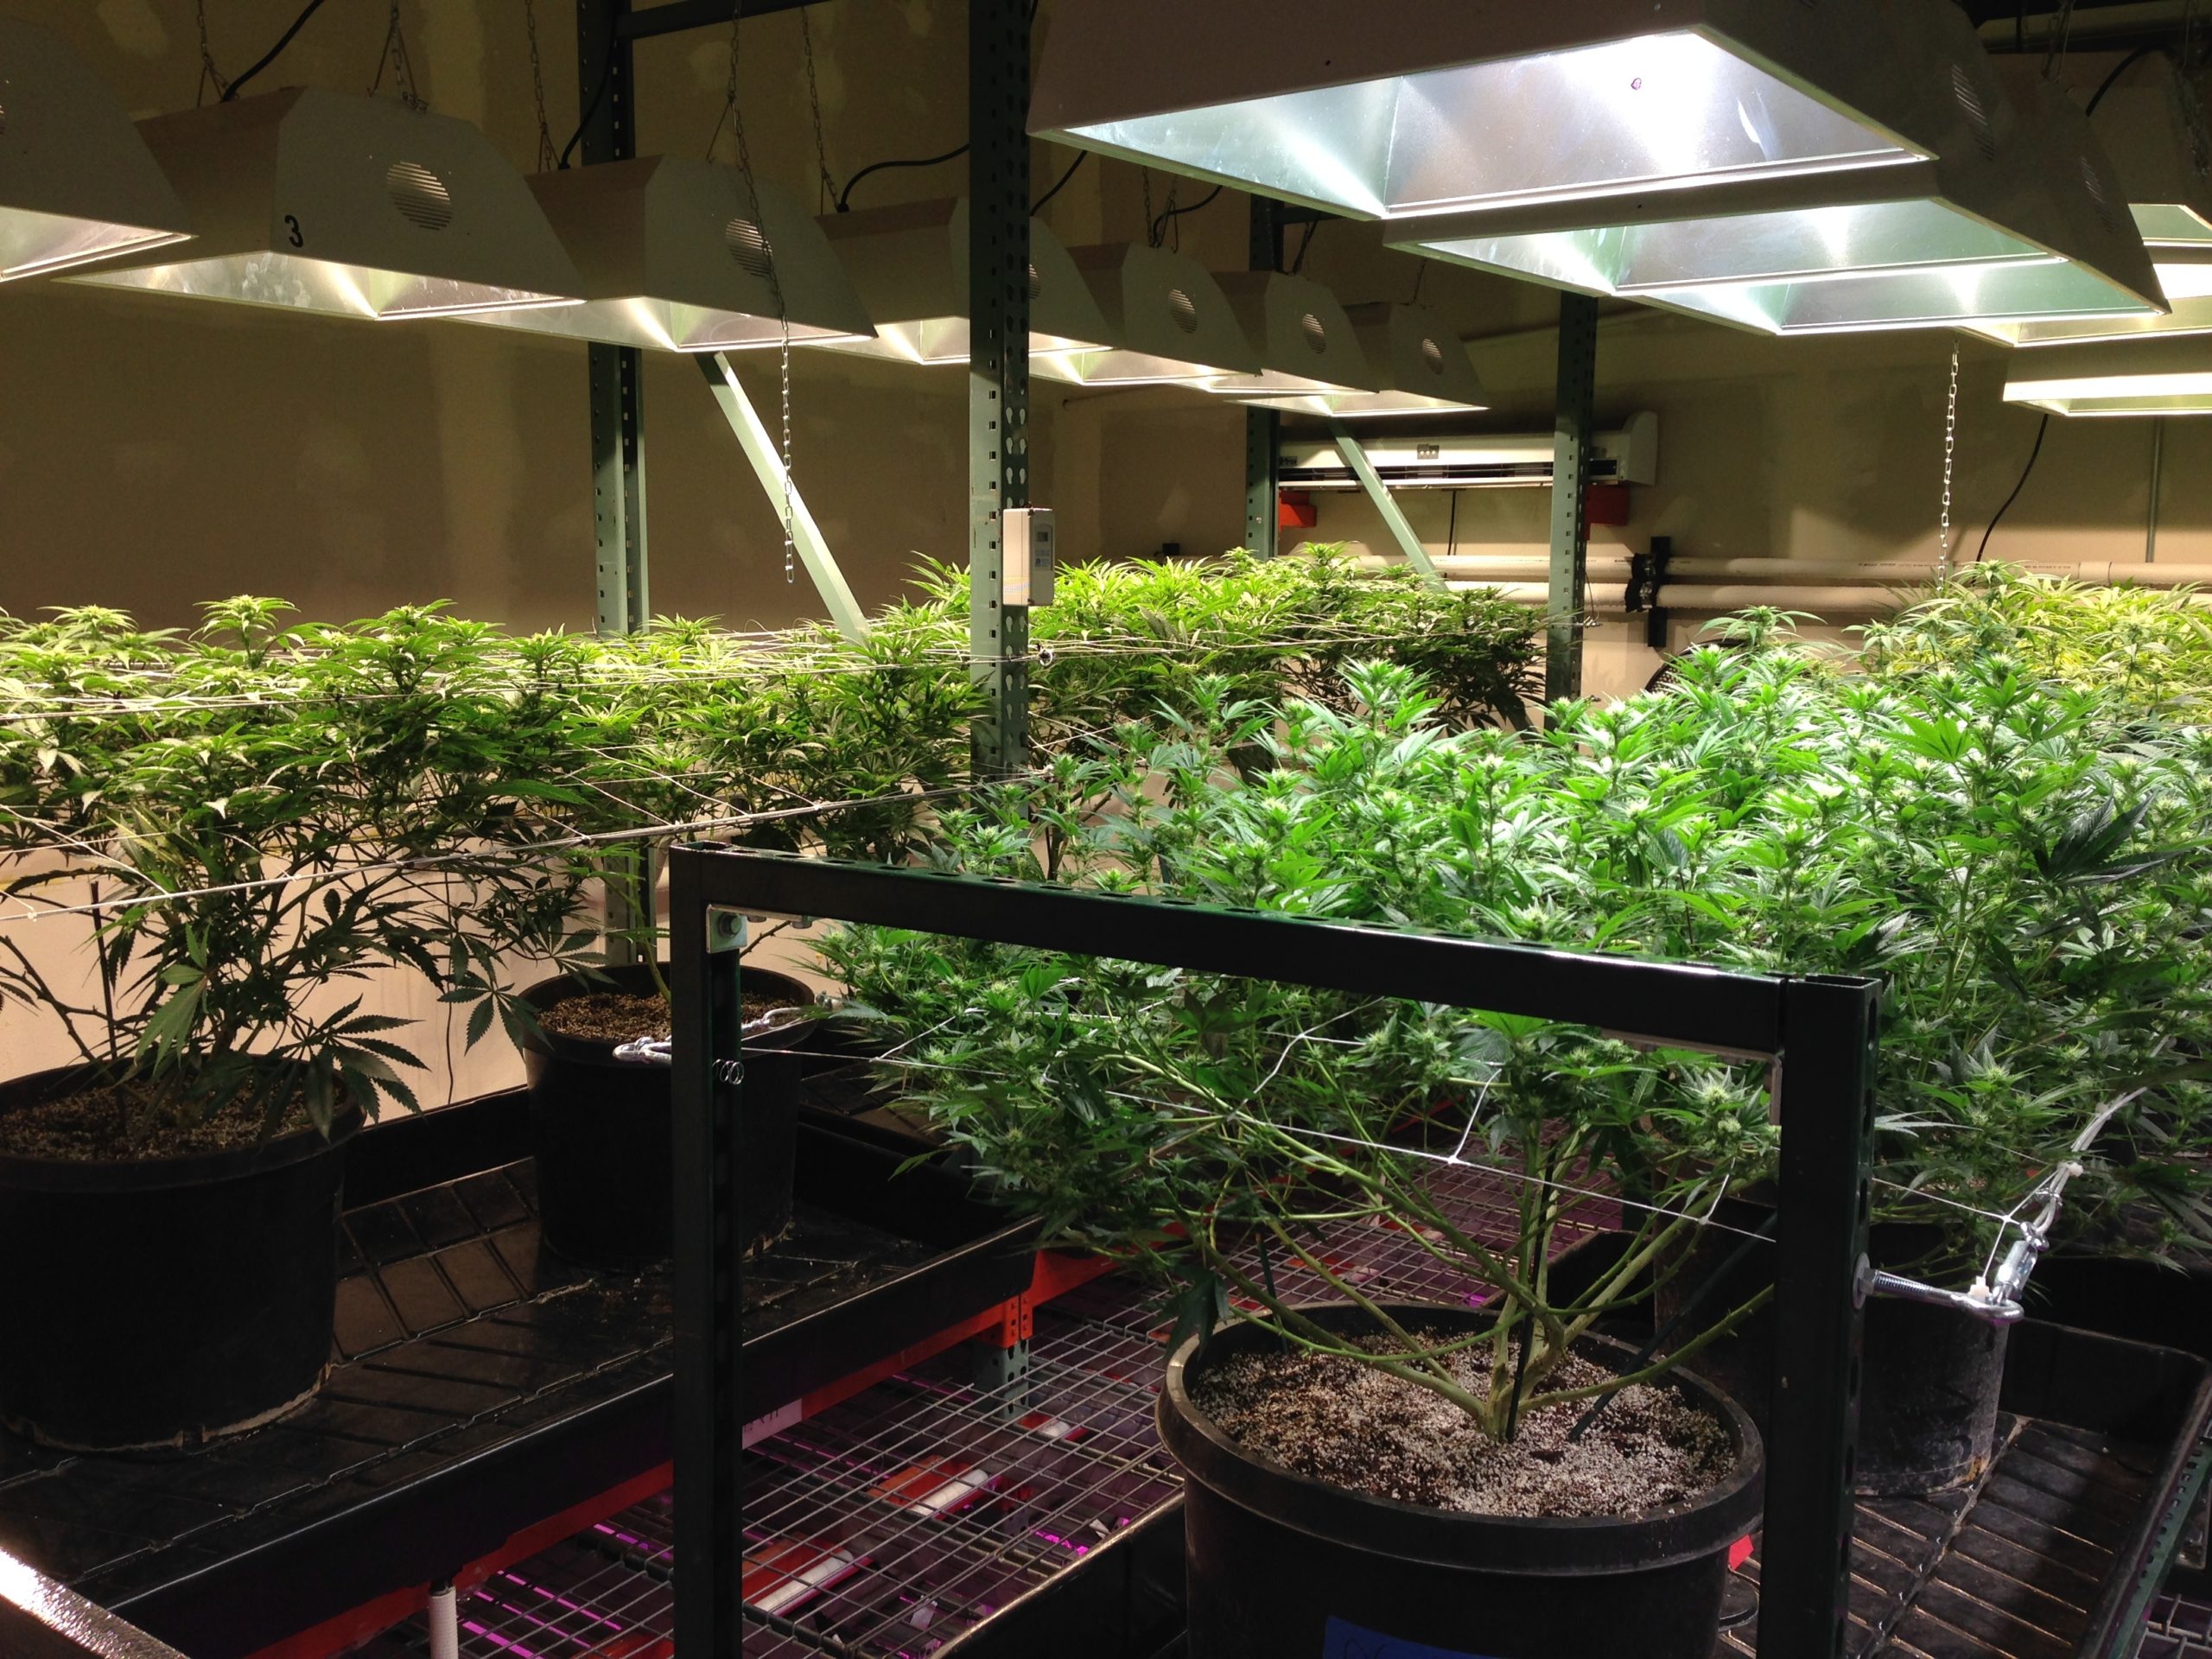 Cannabis growing in aisles in order to reduce costs and increase yields